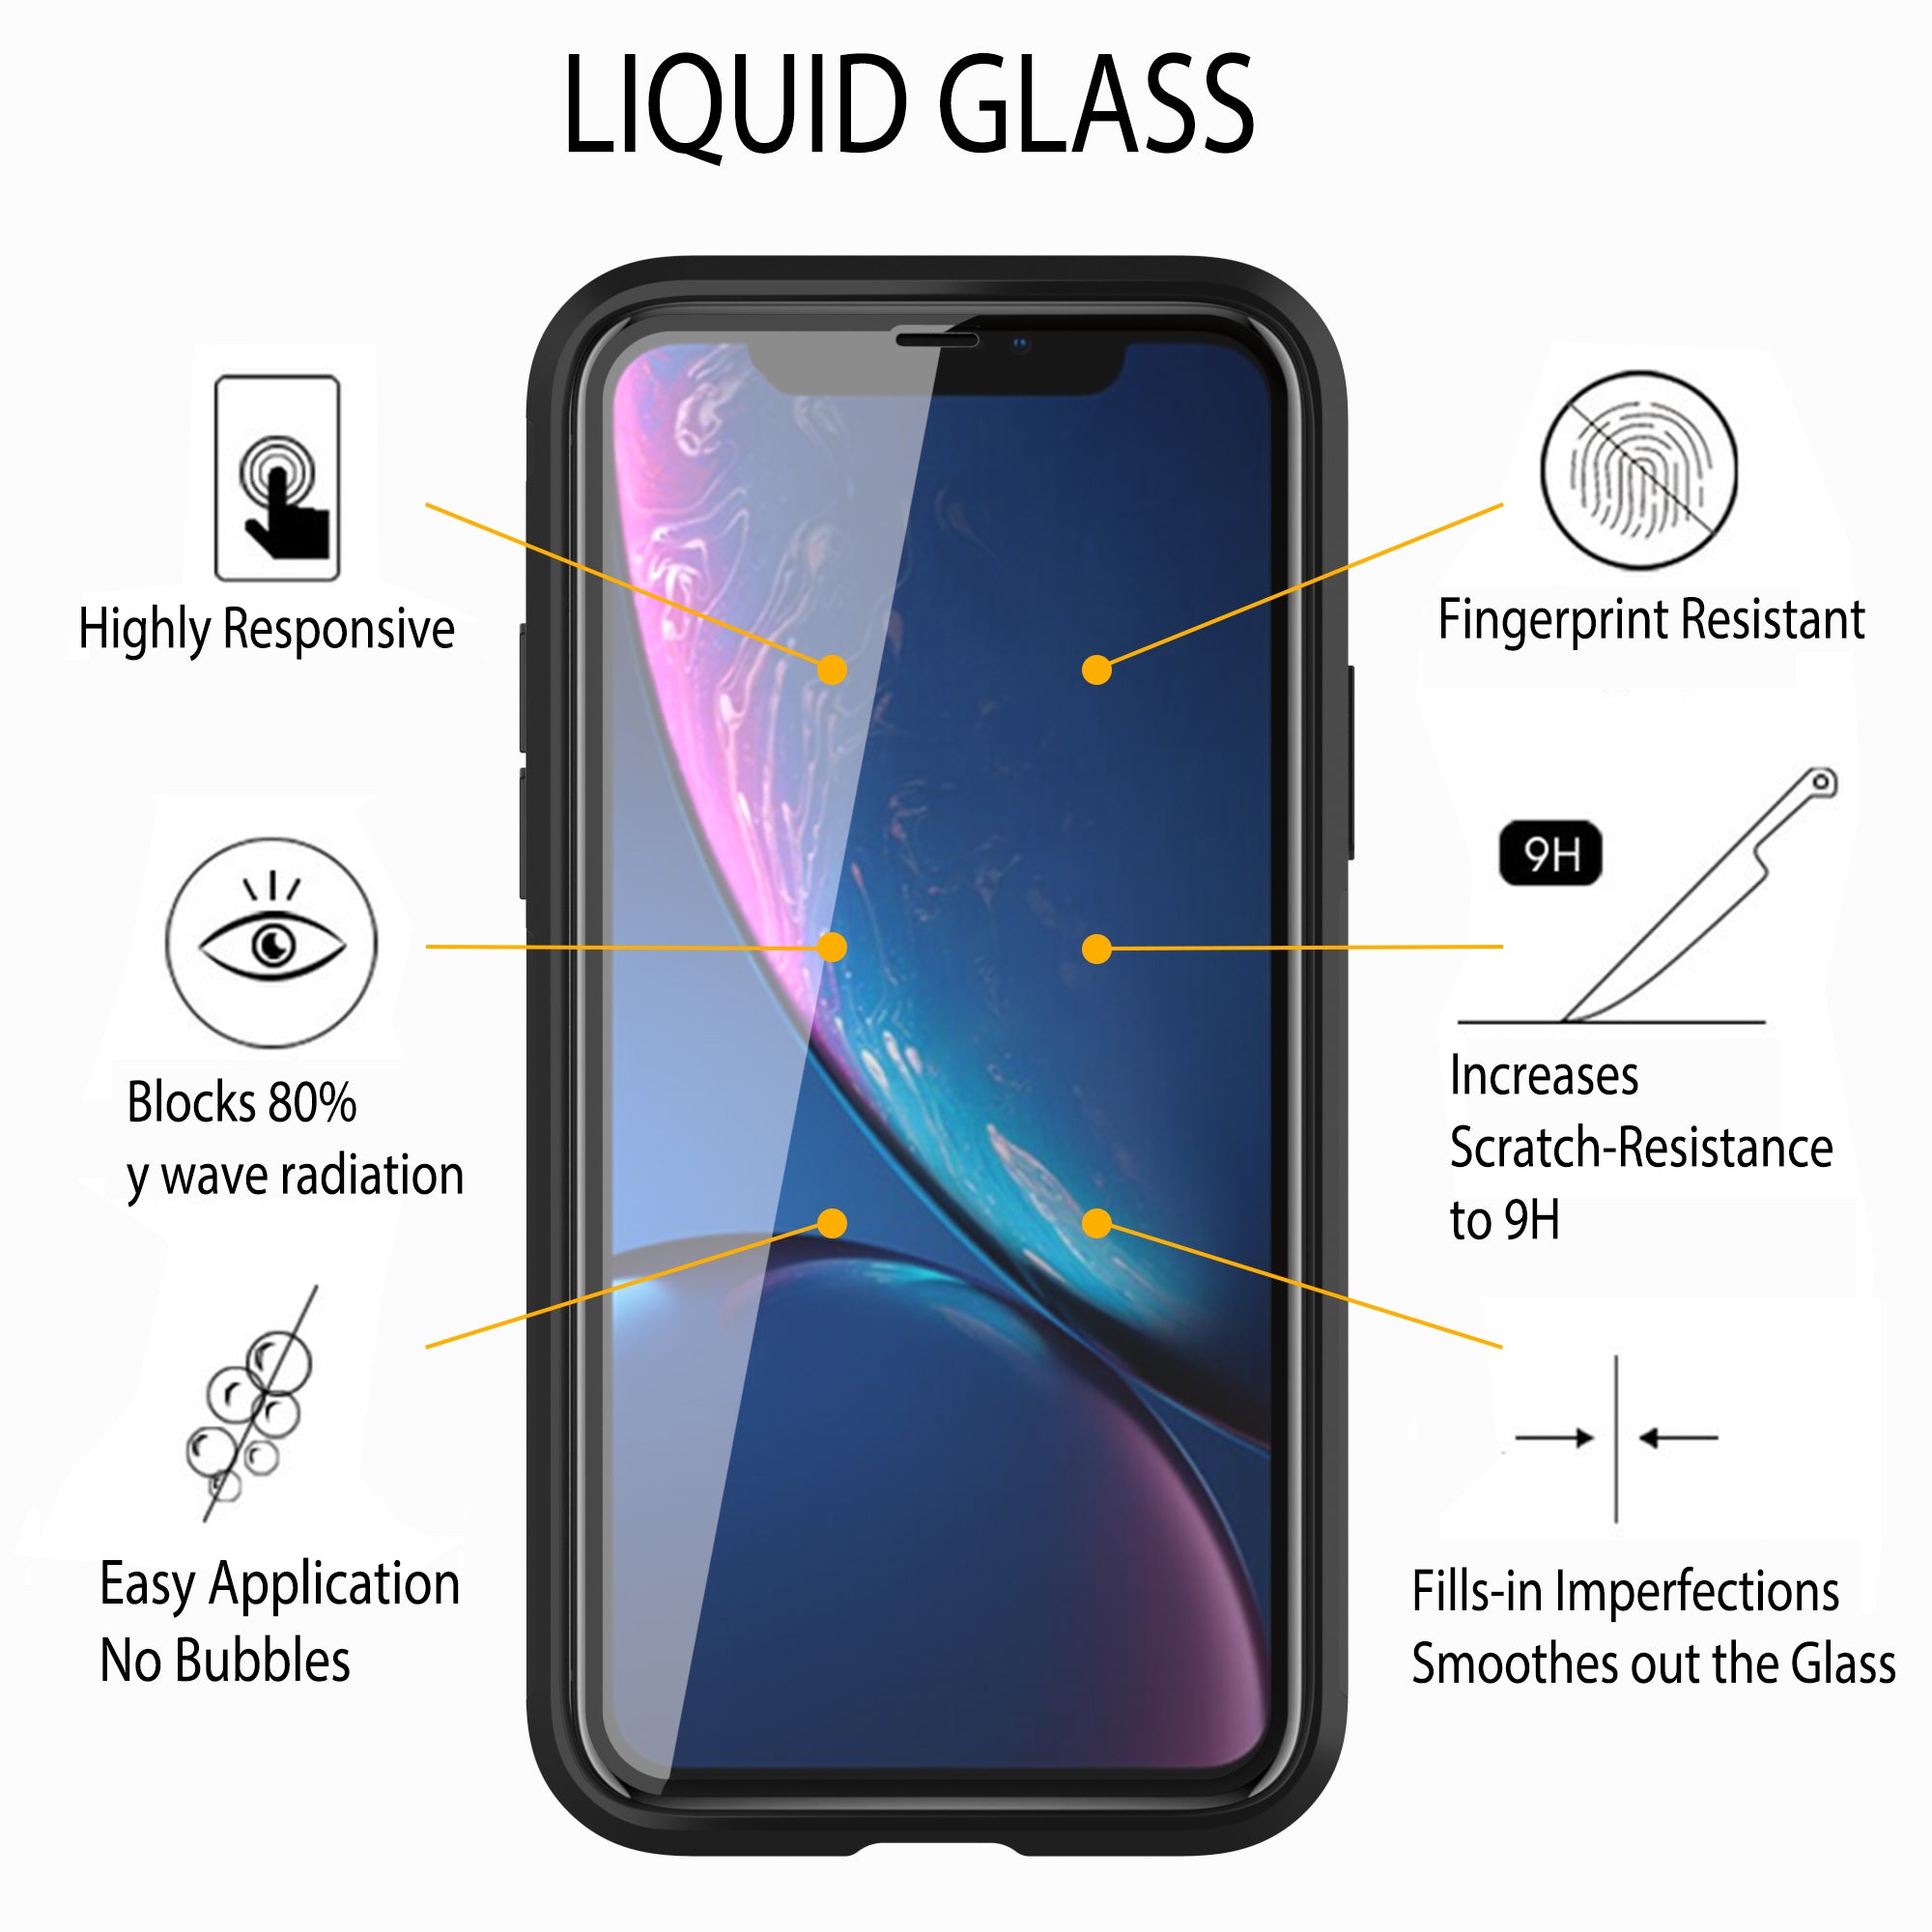 Liquid Glass Screen Protector with $750 Screen Protection Guarantee - Universal